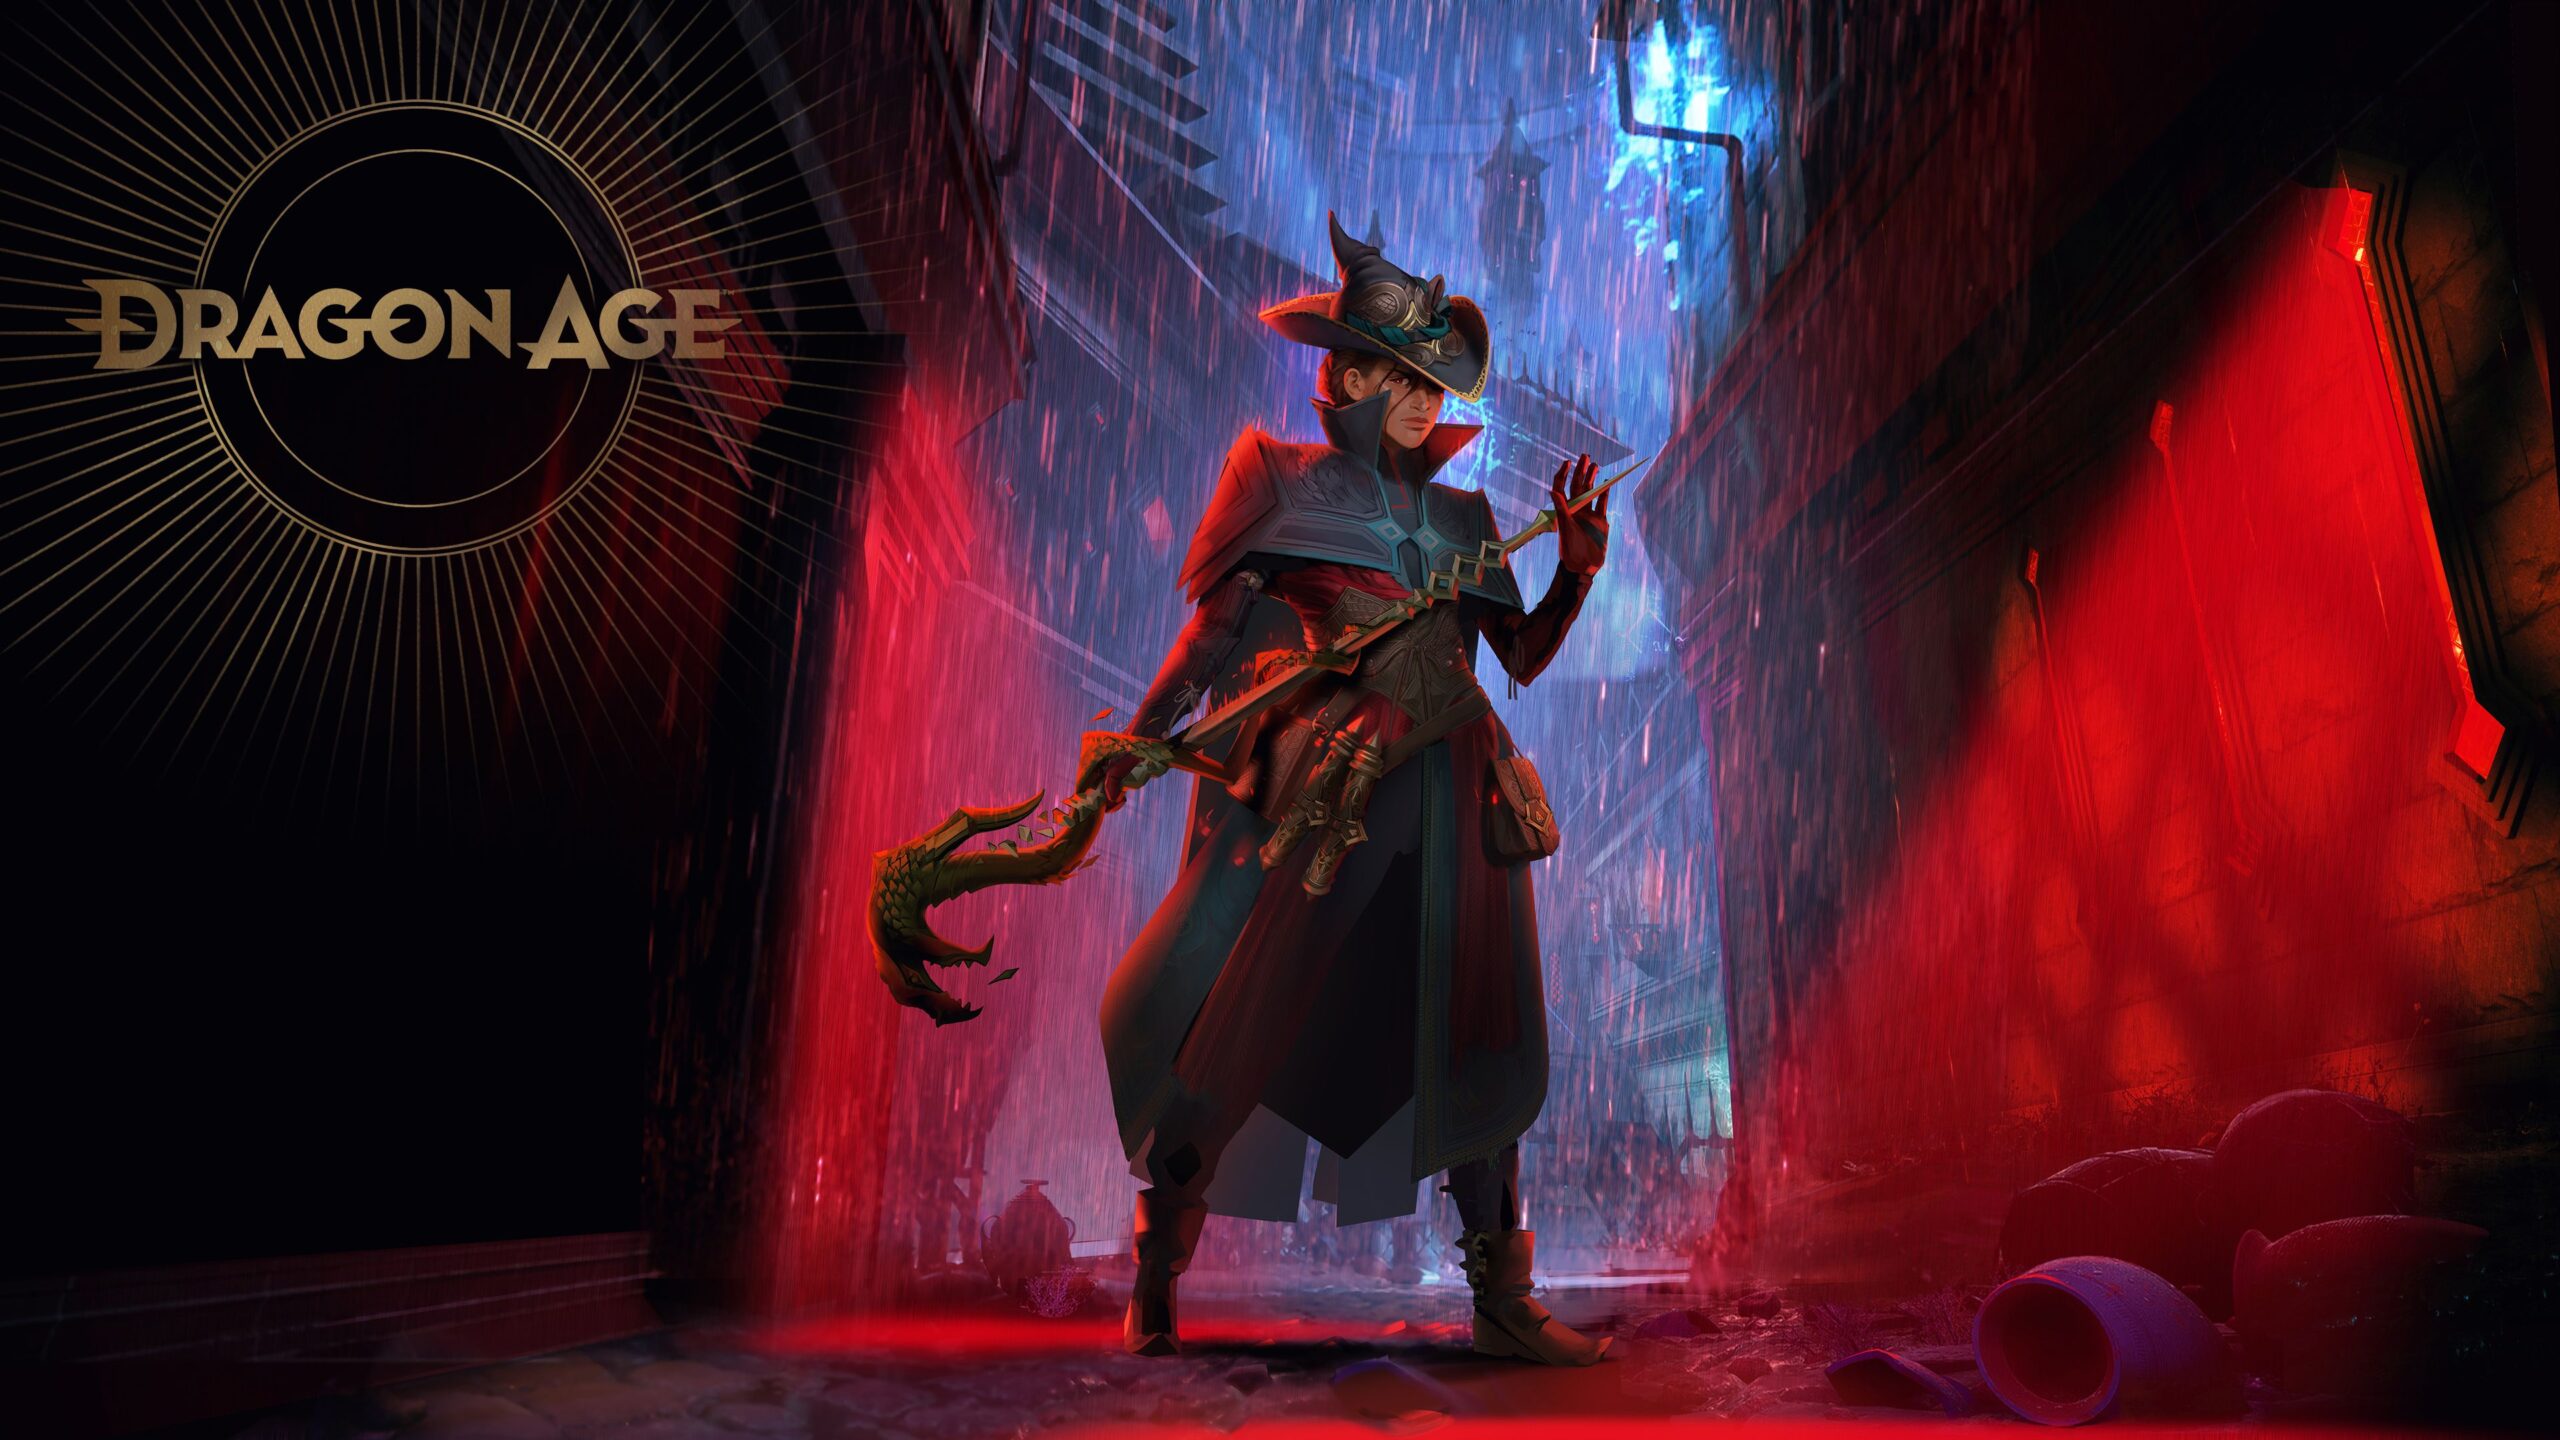 Dragon Age Dreadwolf Trailer and Release Date